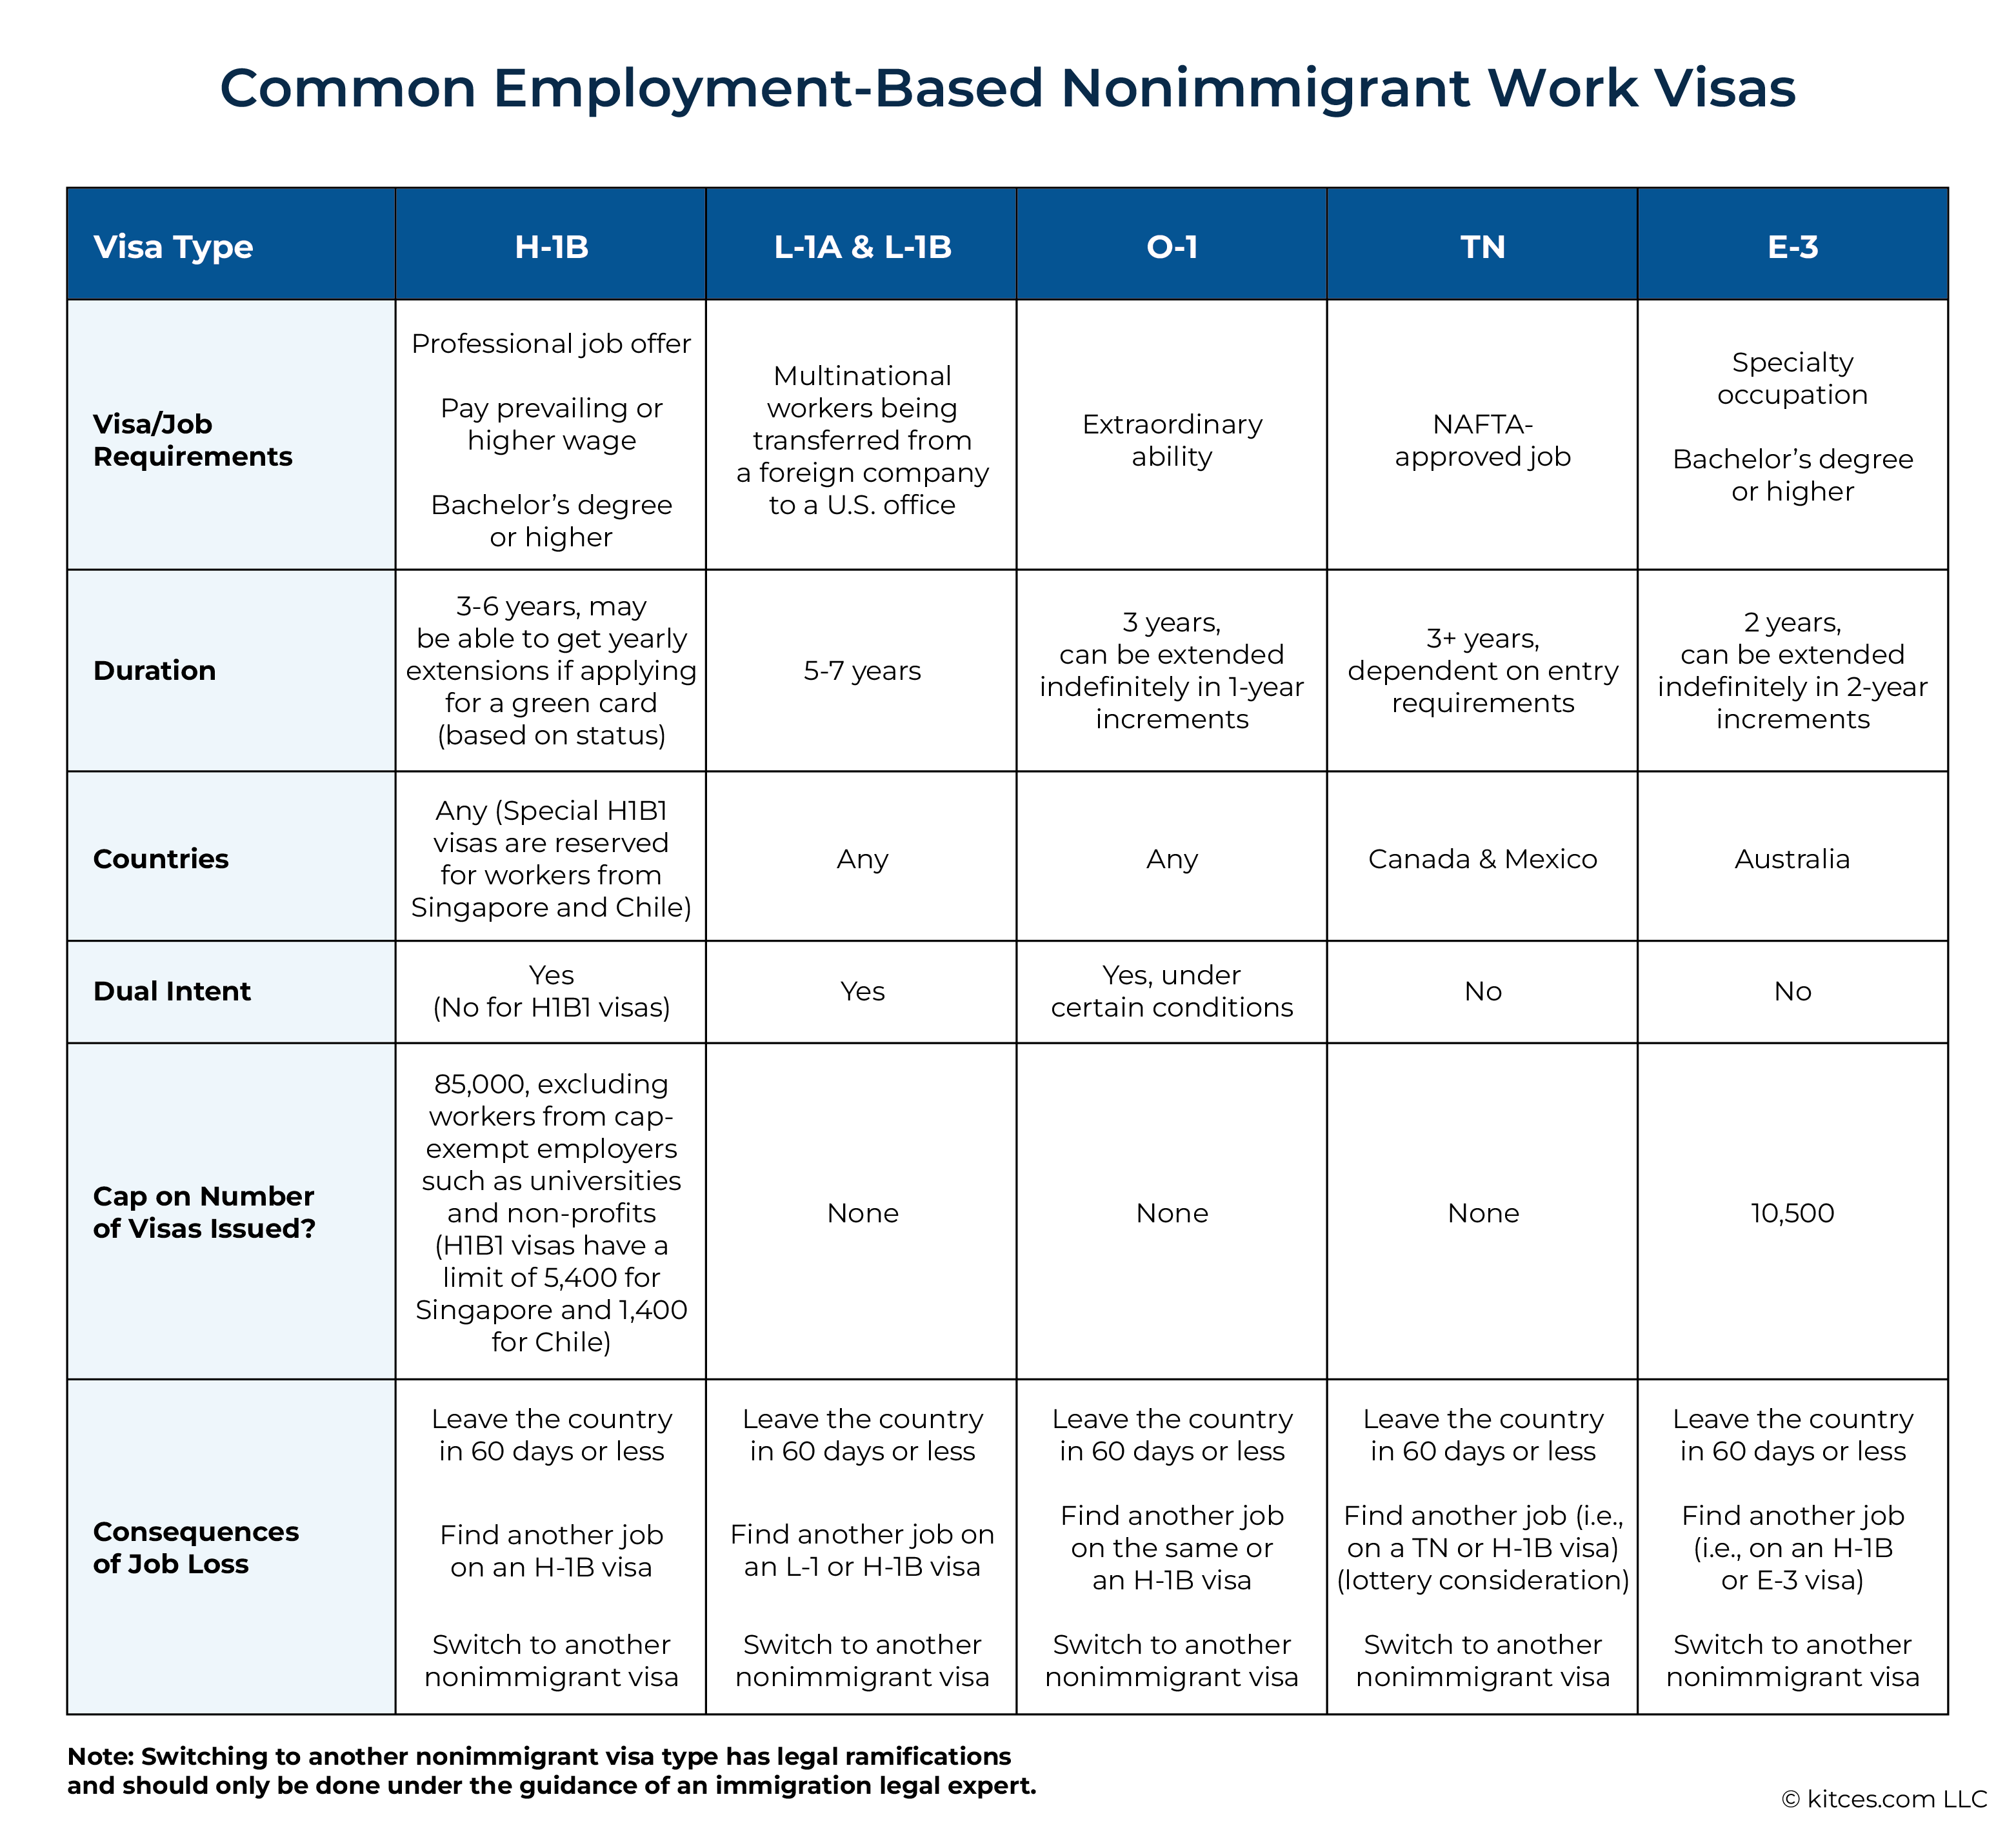 Investing For Visa Holders - Common Employment Based Nonimmigrant Work Visas